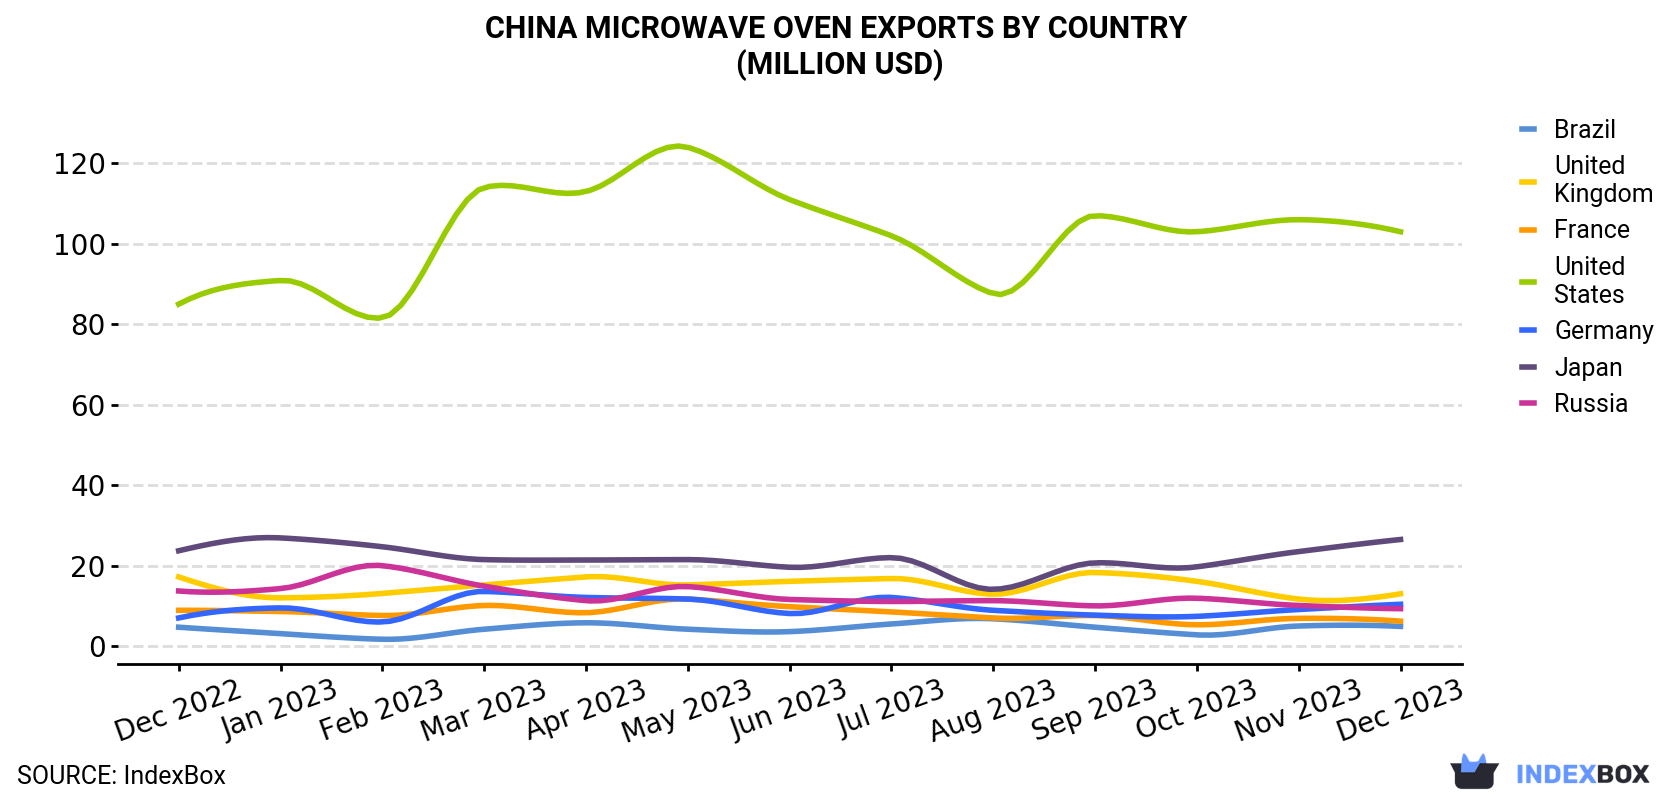 China Microwave Oven Exports By Country (Million USD)